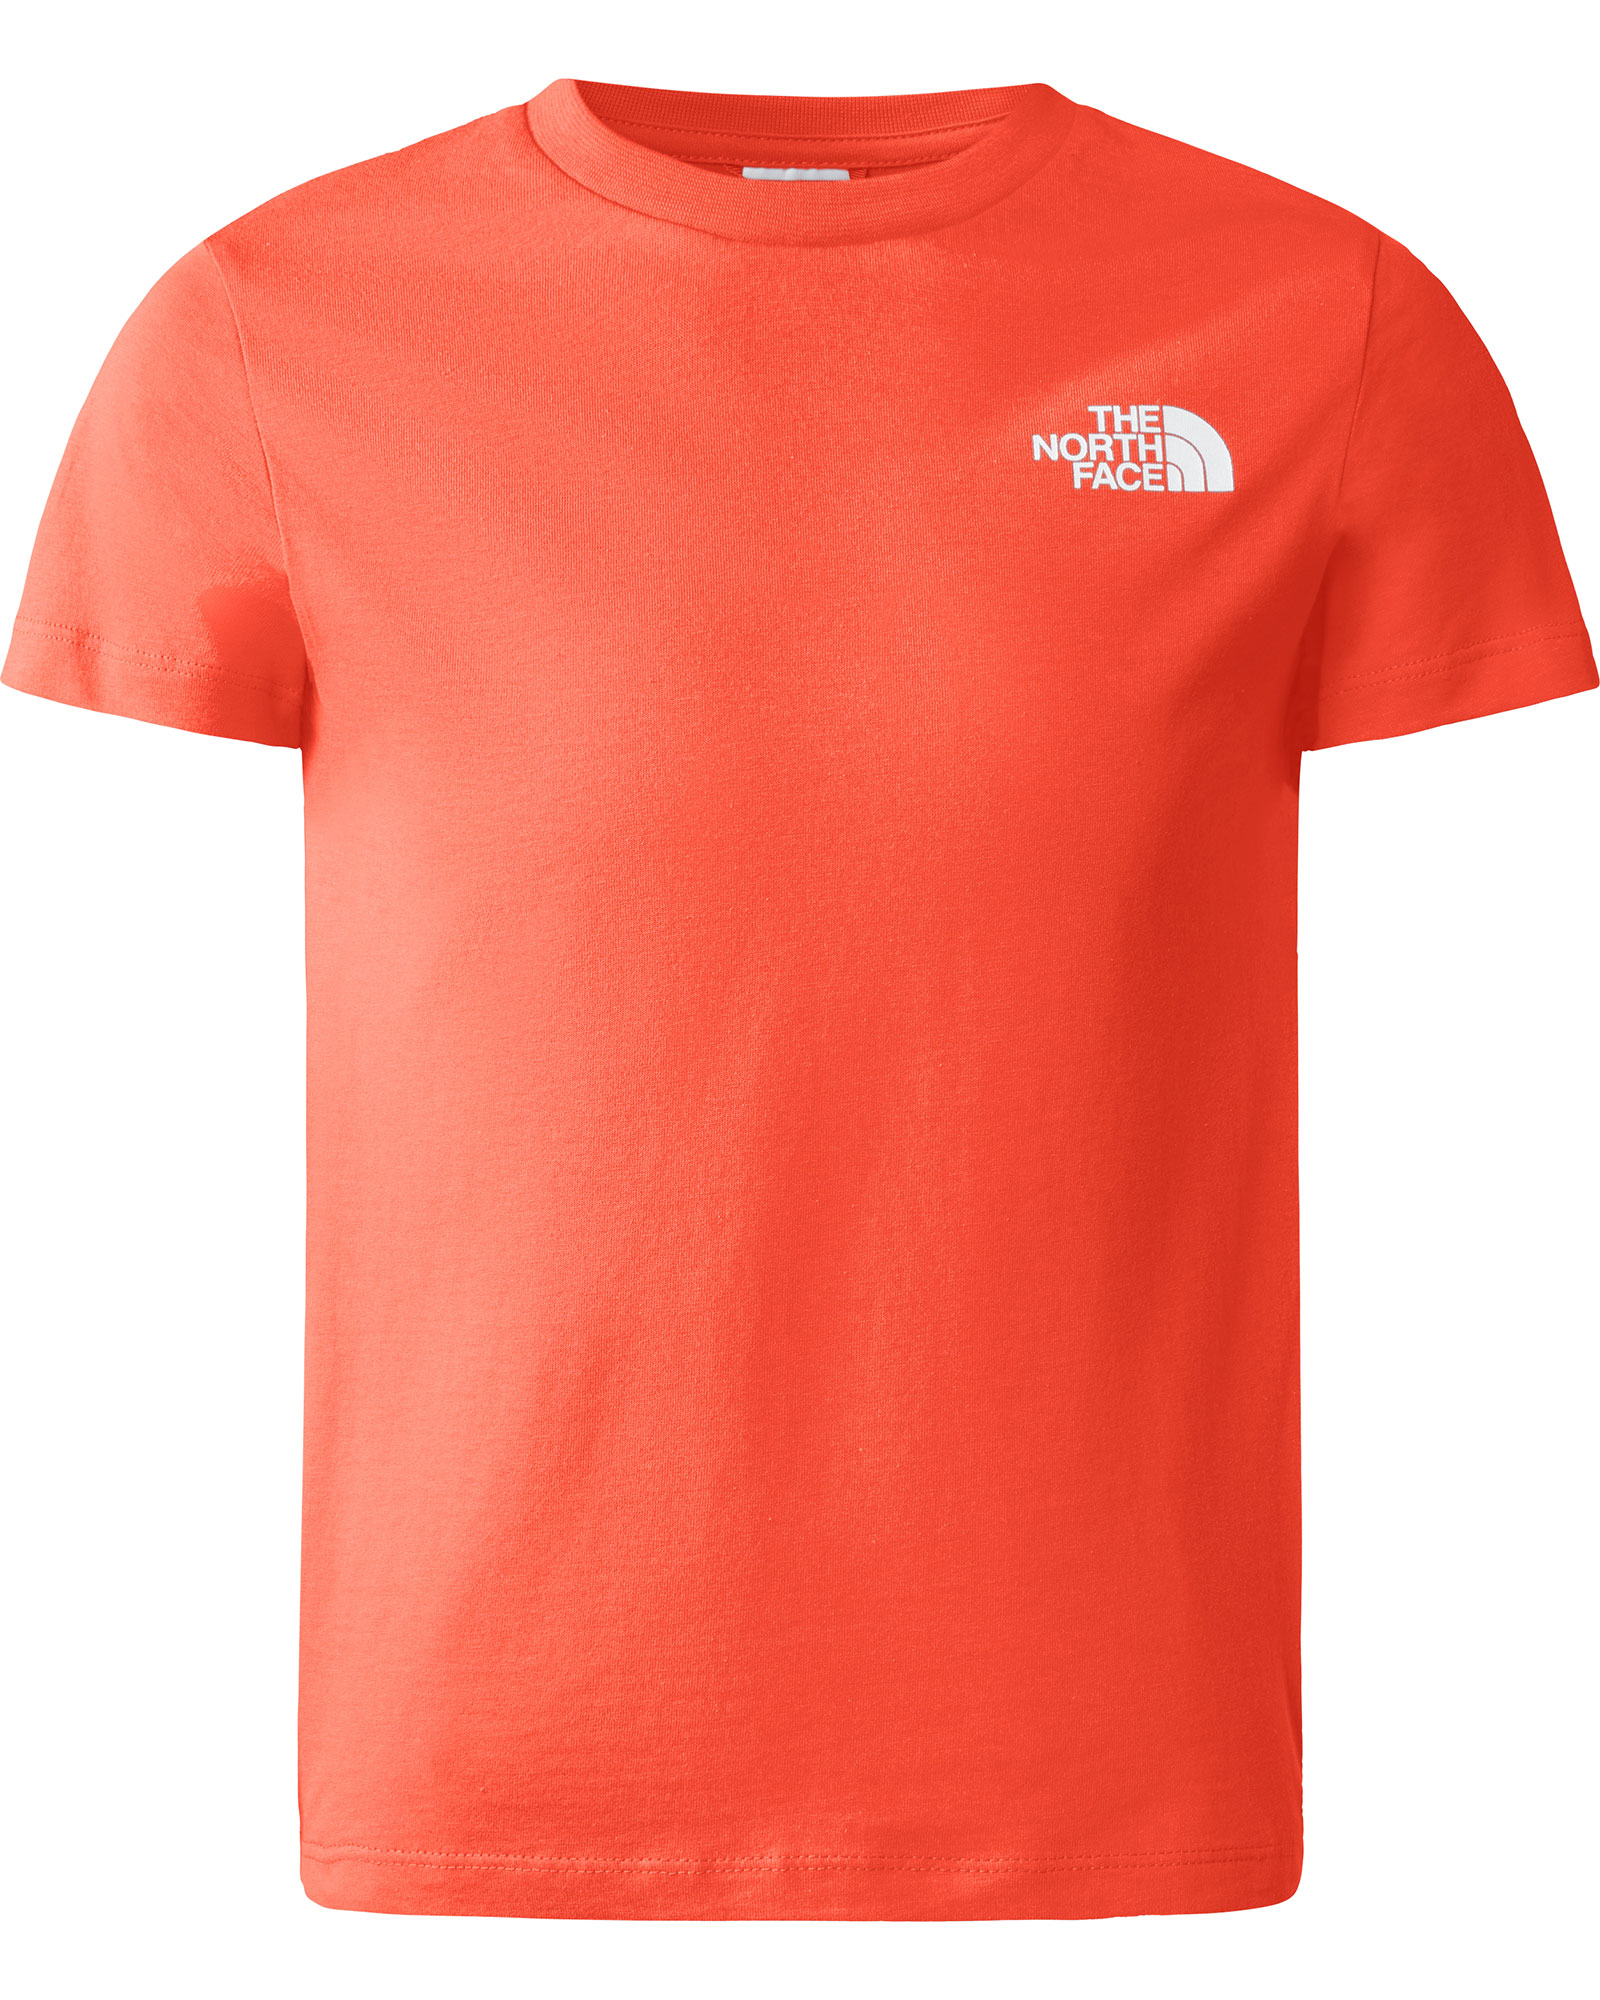 The North Face Youth Simple Dome T Shirt XL - Retro Orange XL